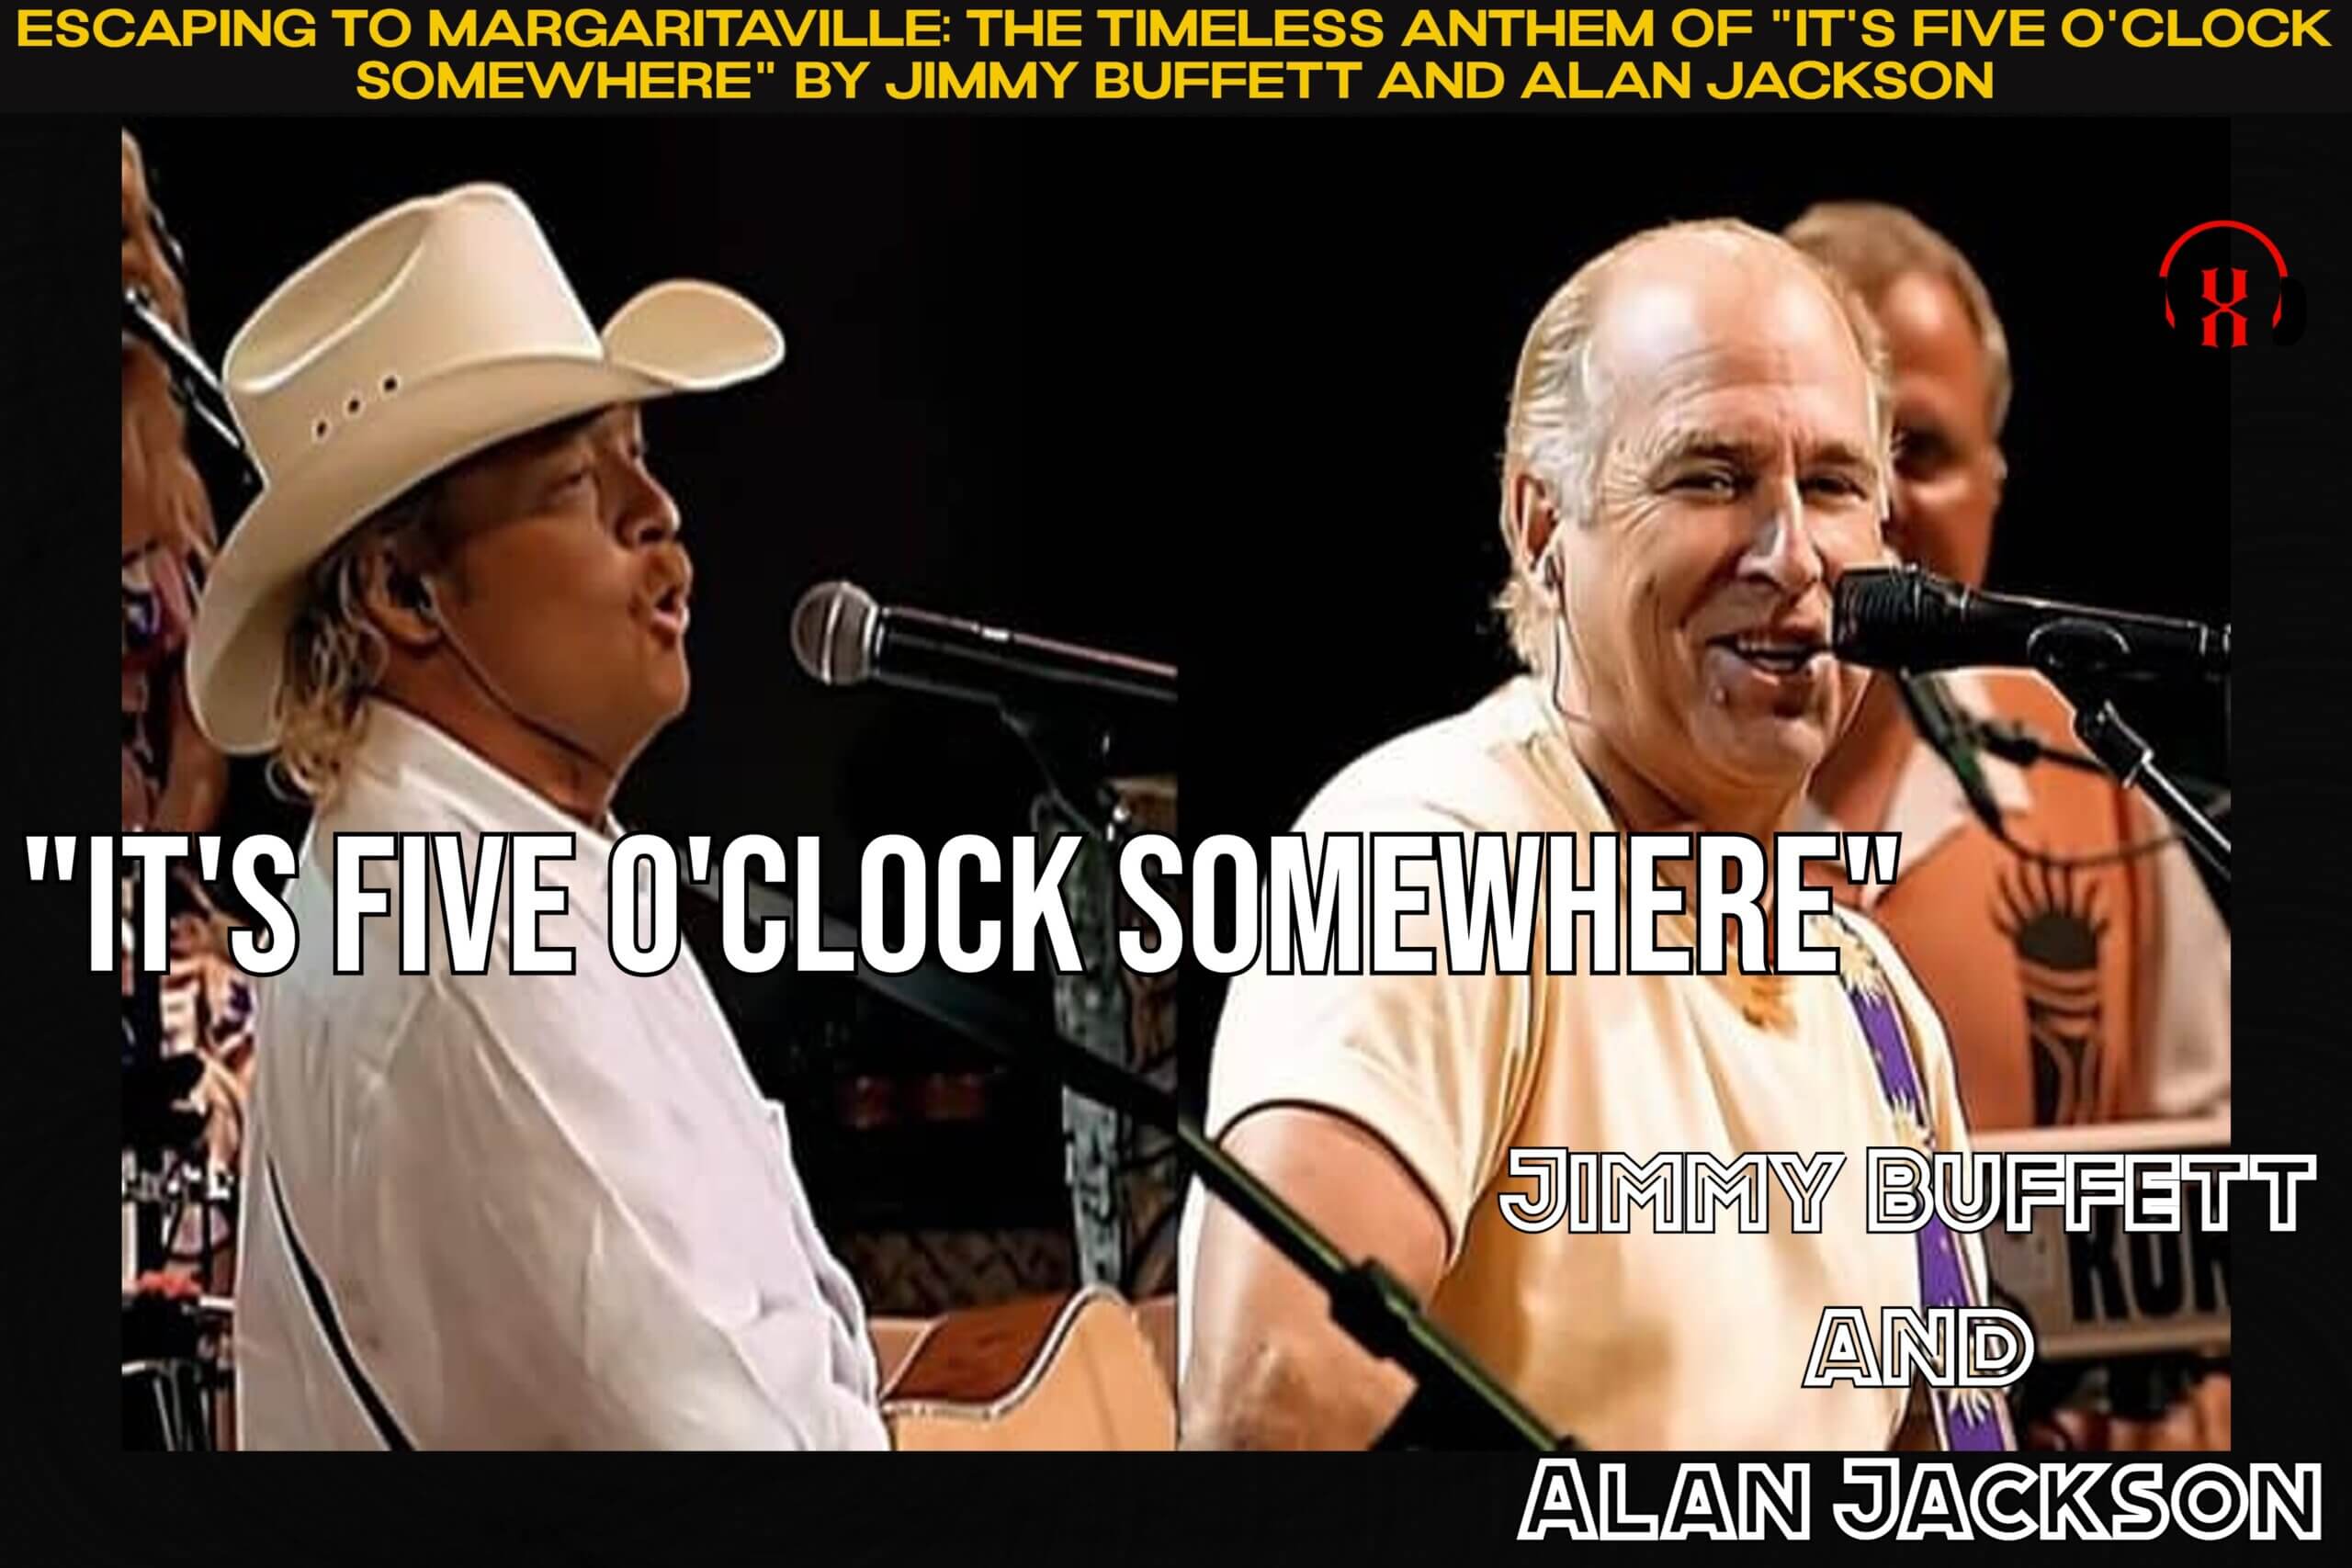 Escaping to Margaritaville: The Timeless Anthem of “It’s Five O’Clock Somewhere” by Jimmy Buffett and Alan Jackson